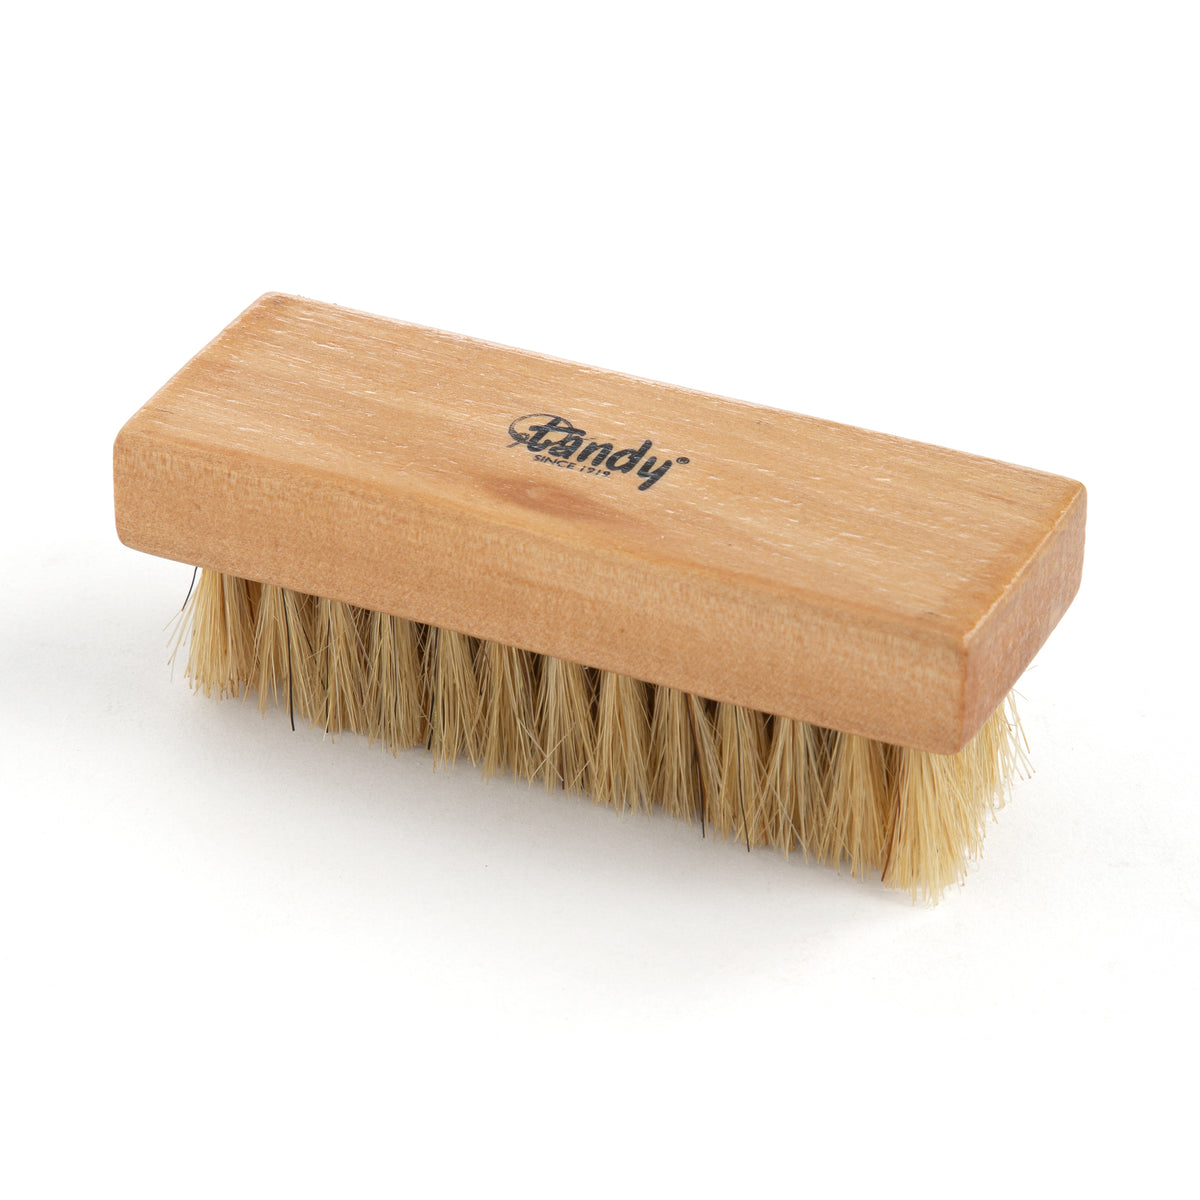 Boar Hair Cleaning Brush from Tandy Leather